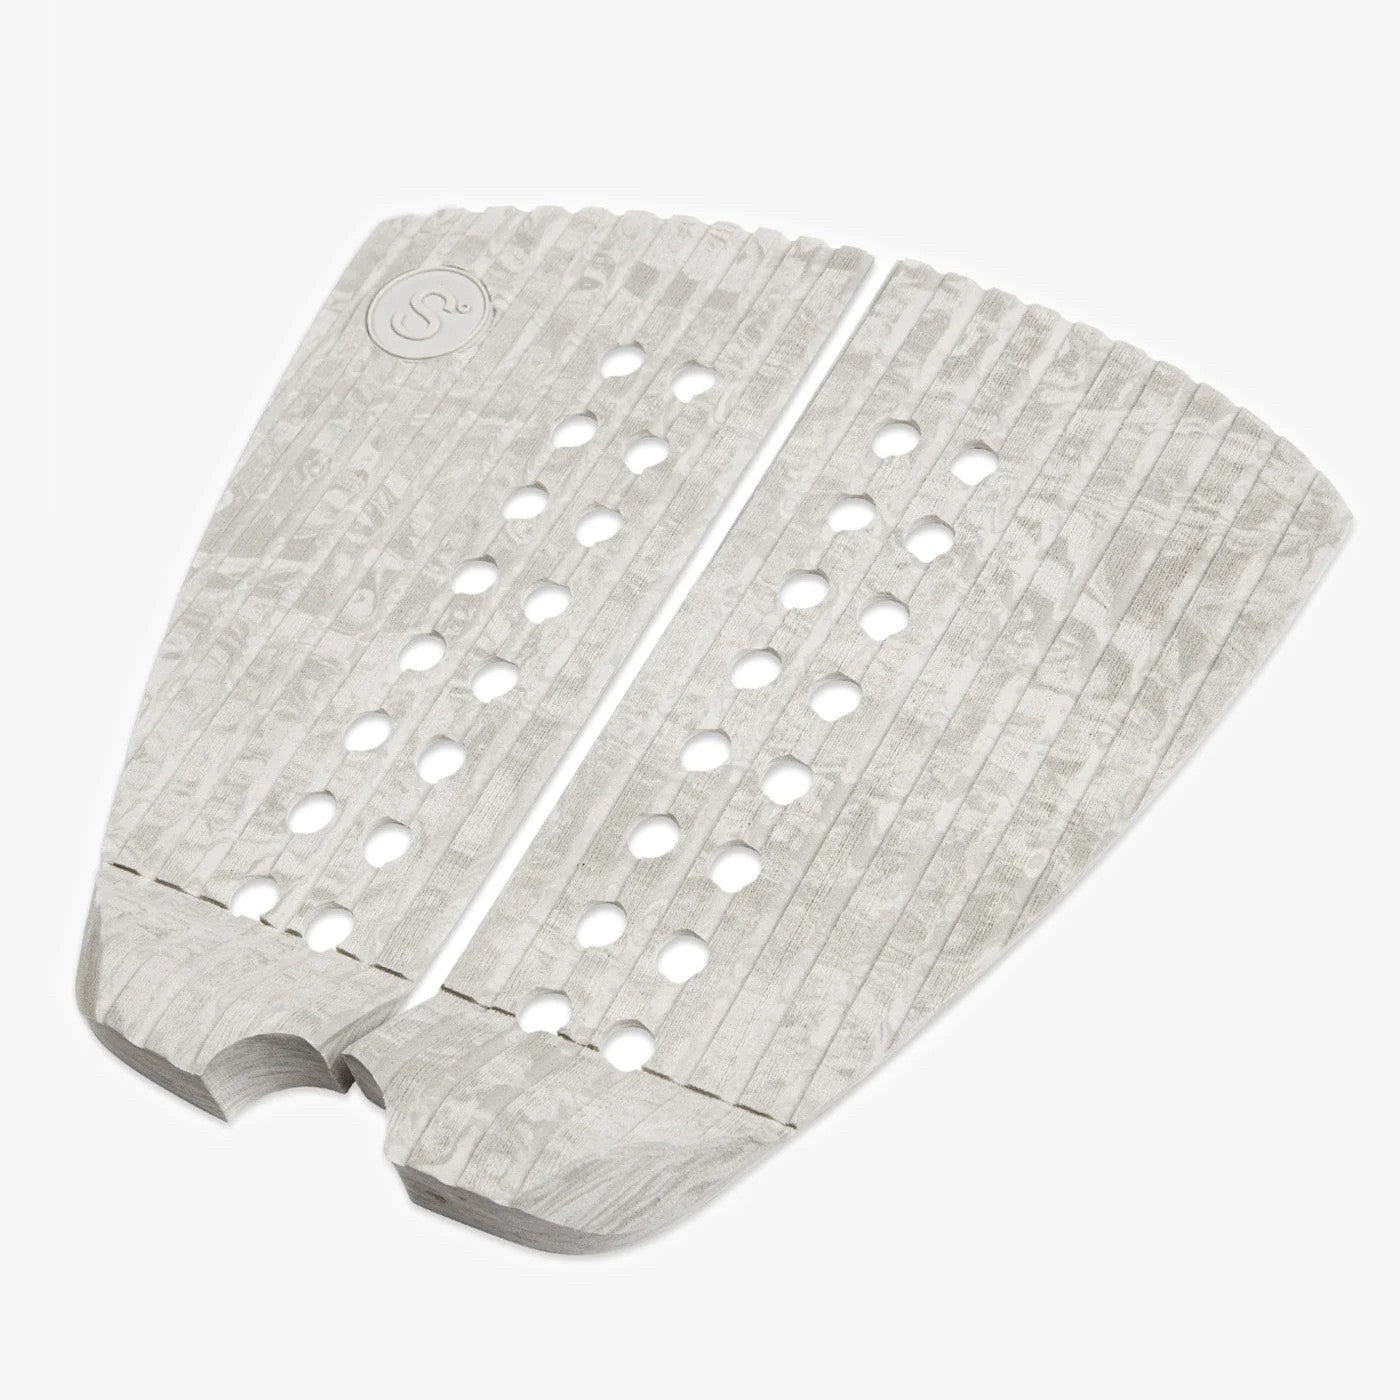 SYMPL NO 3 - Traction Pad Surf 2 pieces - White